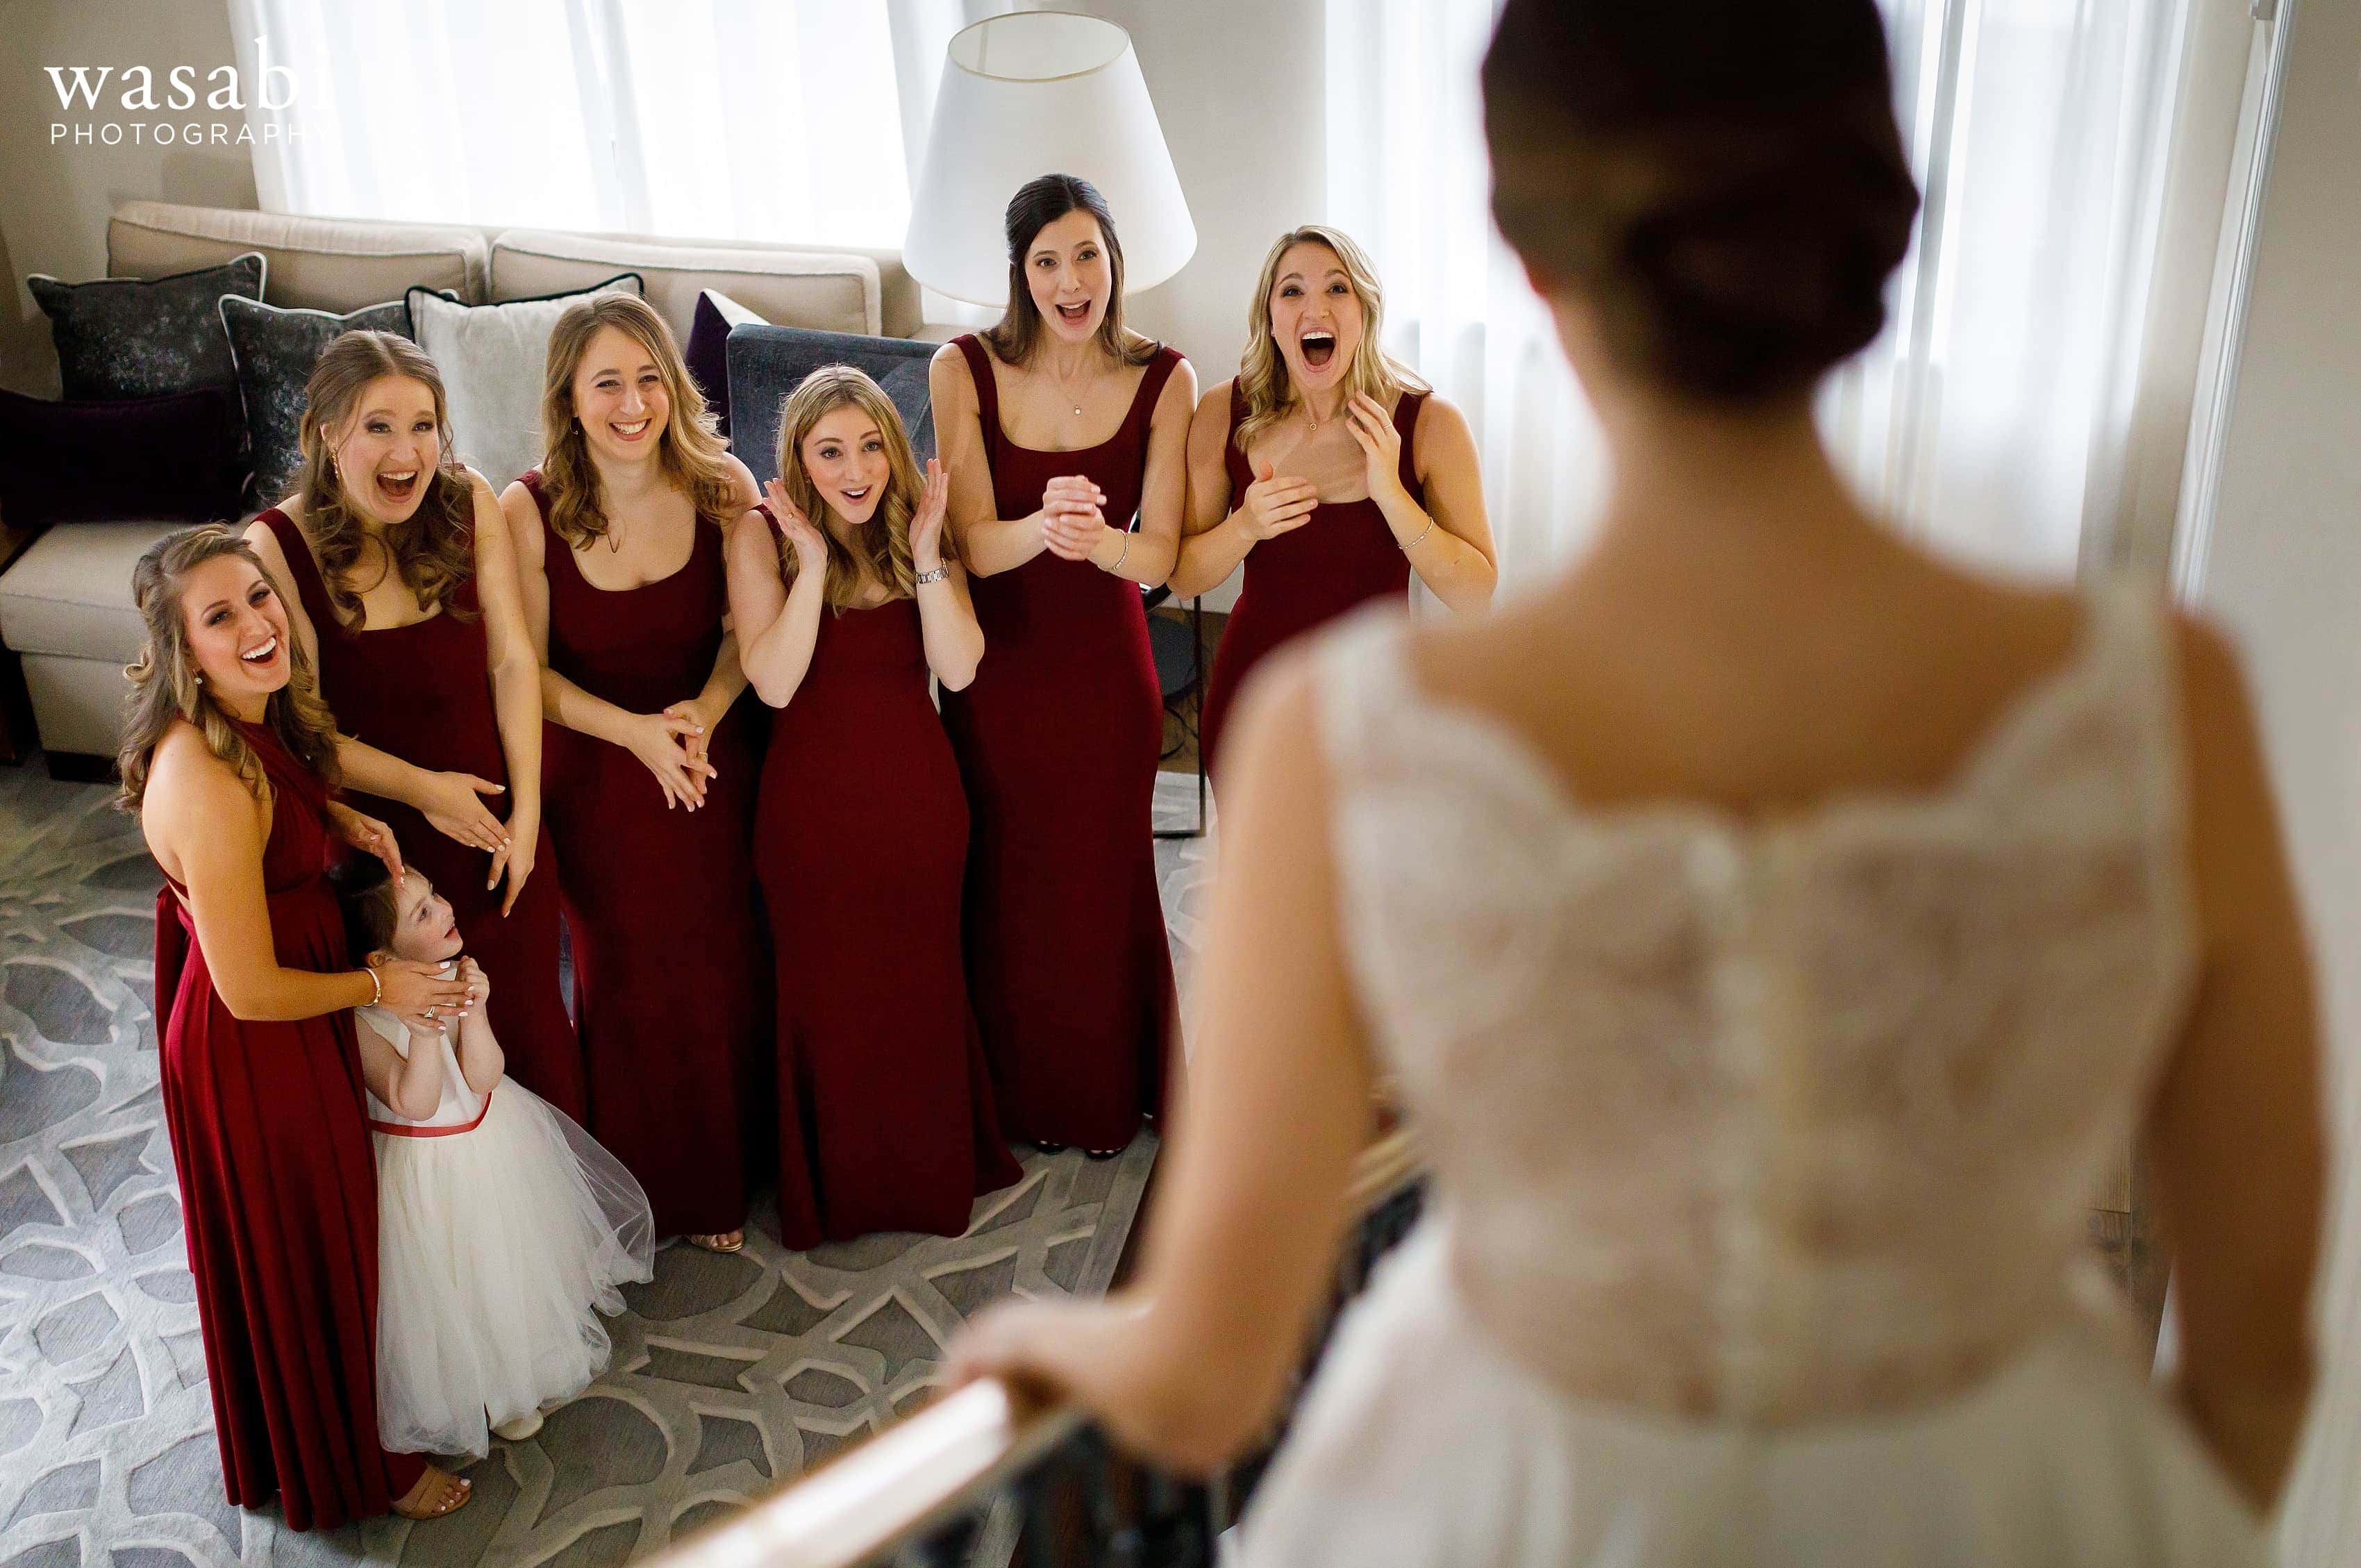 Bridesmaids react to seeing bride in wedding dress walking down the stairs in the presidential suite at InterContinental Chicago Magnificent Mile Hotel